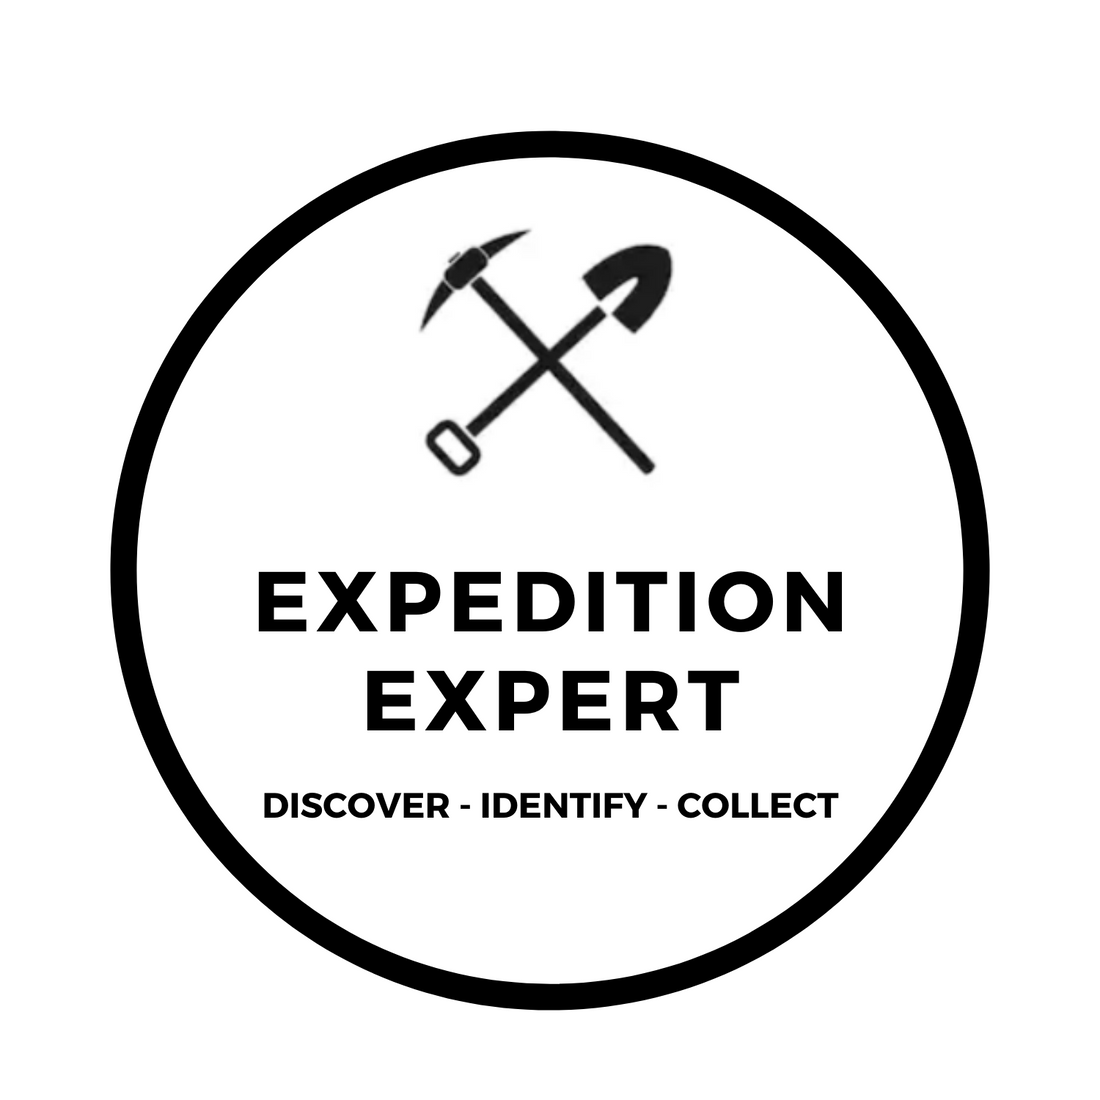 EXPEDITION EXPERT